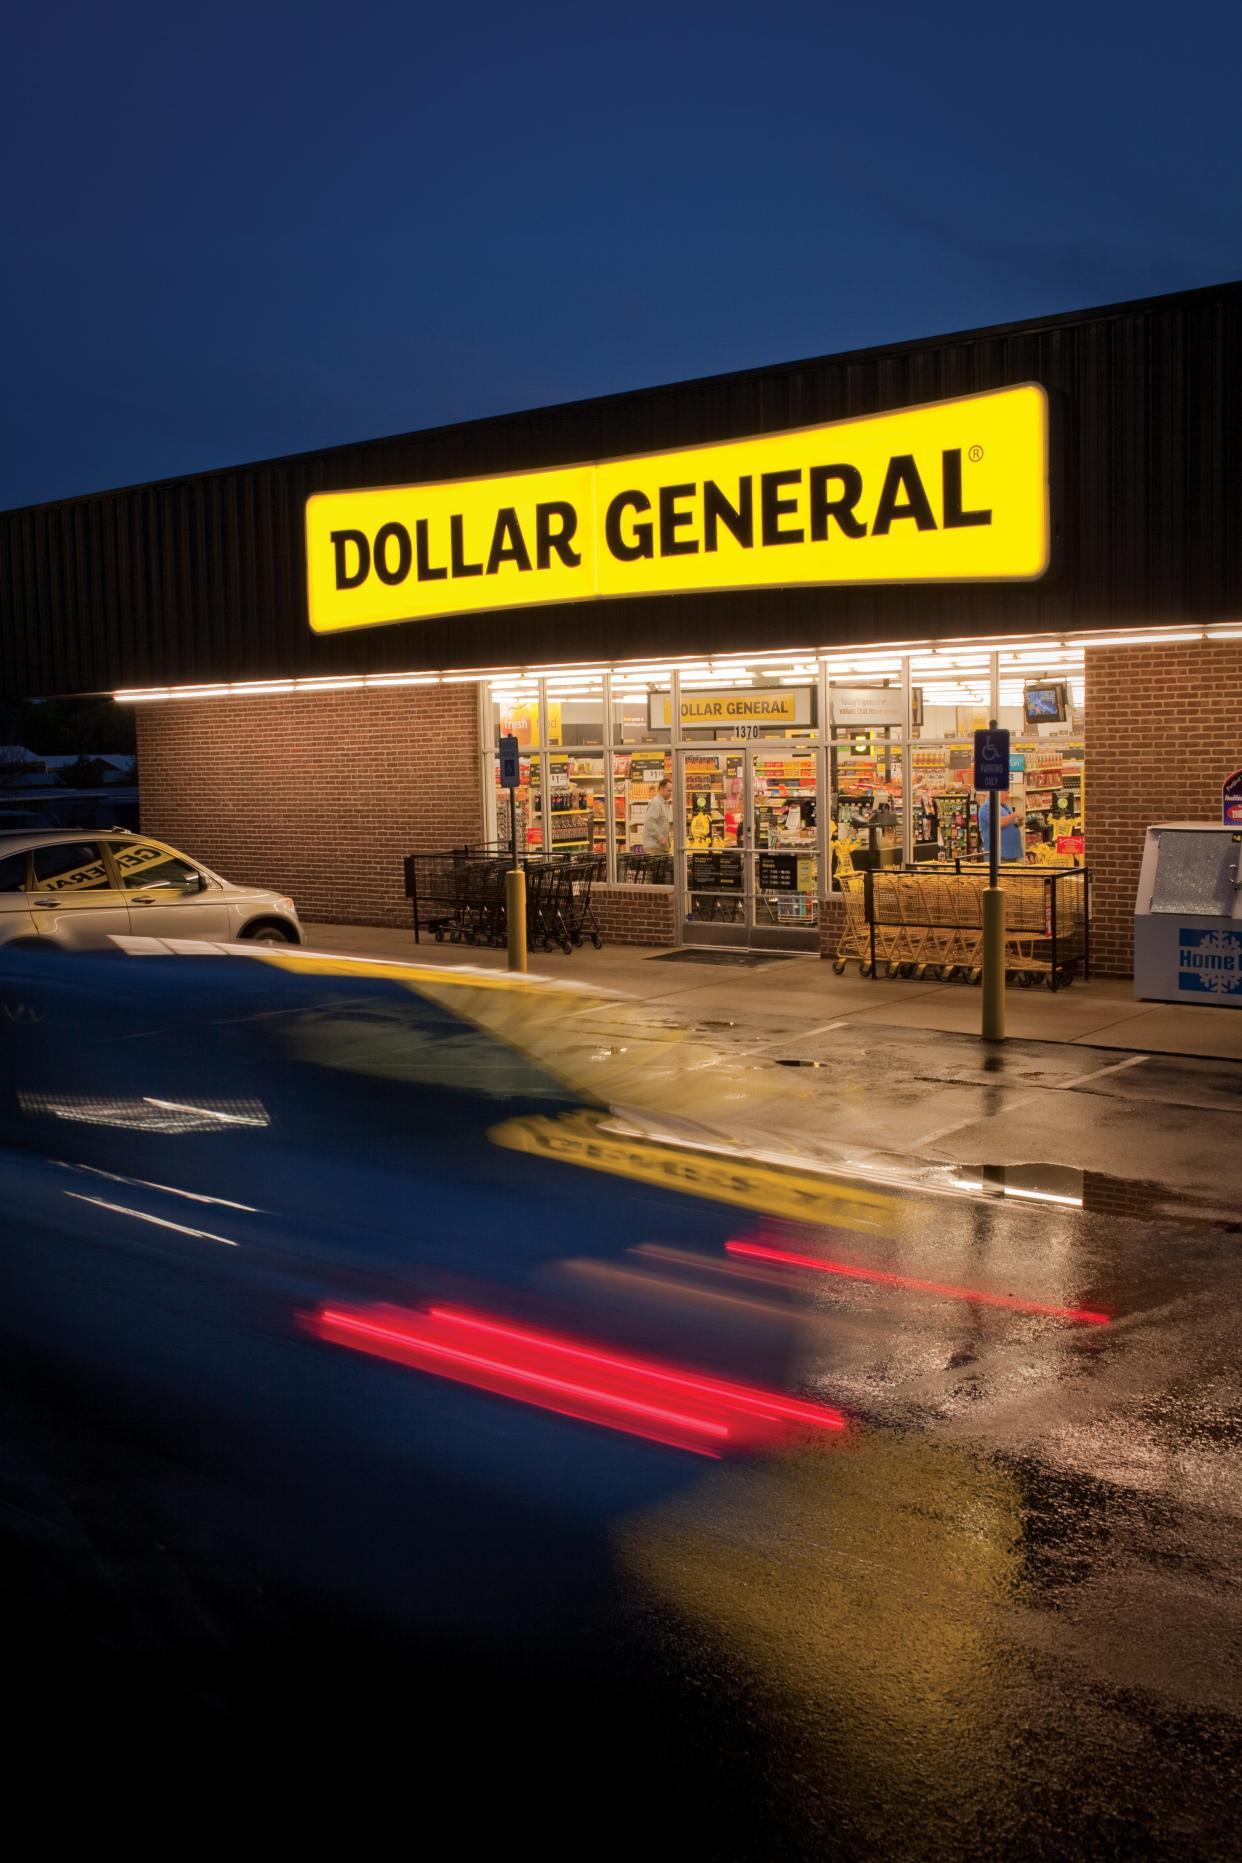 The bulk of a $1 million settlement involving Dollar General will be distributed among Ohio food banks. Attorney General Dave Yost filed a lawsuit against the retail giant last year, accusing the Tennessee based chain of deceptive pricing practices. Dollar General admitted no wrongdoing as part of the settlement.